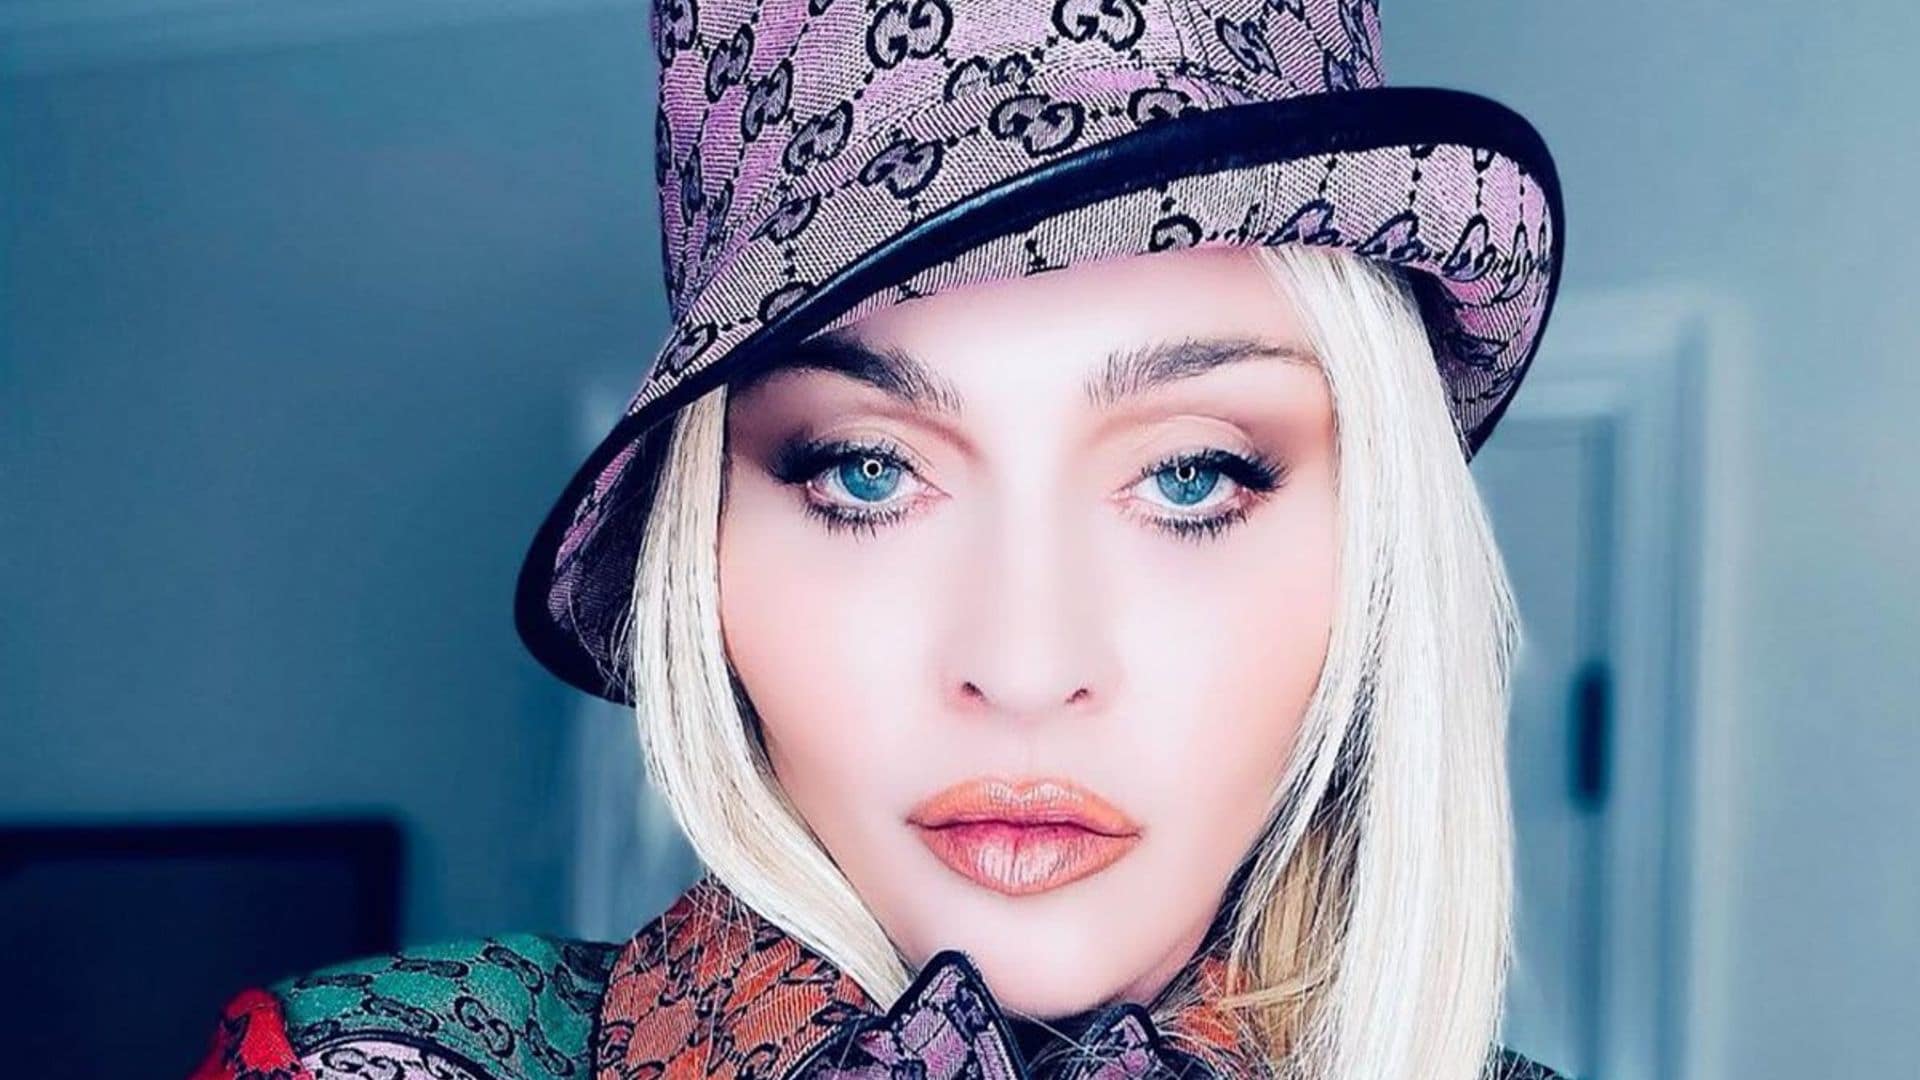 Madonna proves she drinks out of the fountain of youth in a colorful Gucci outfit